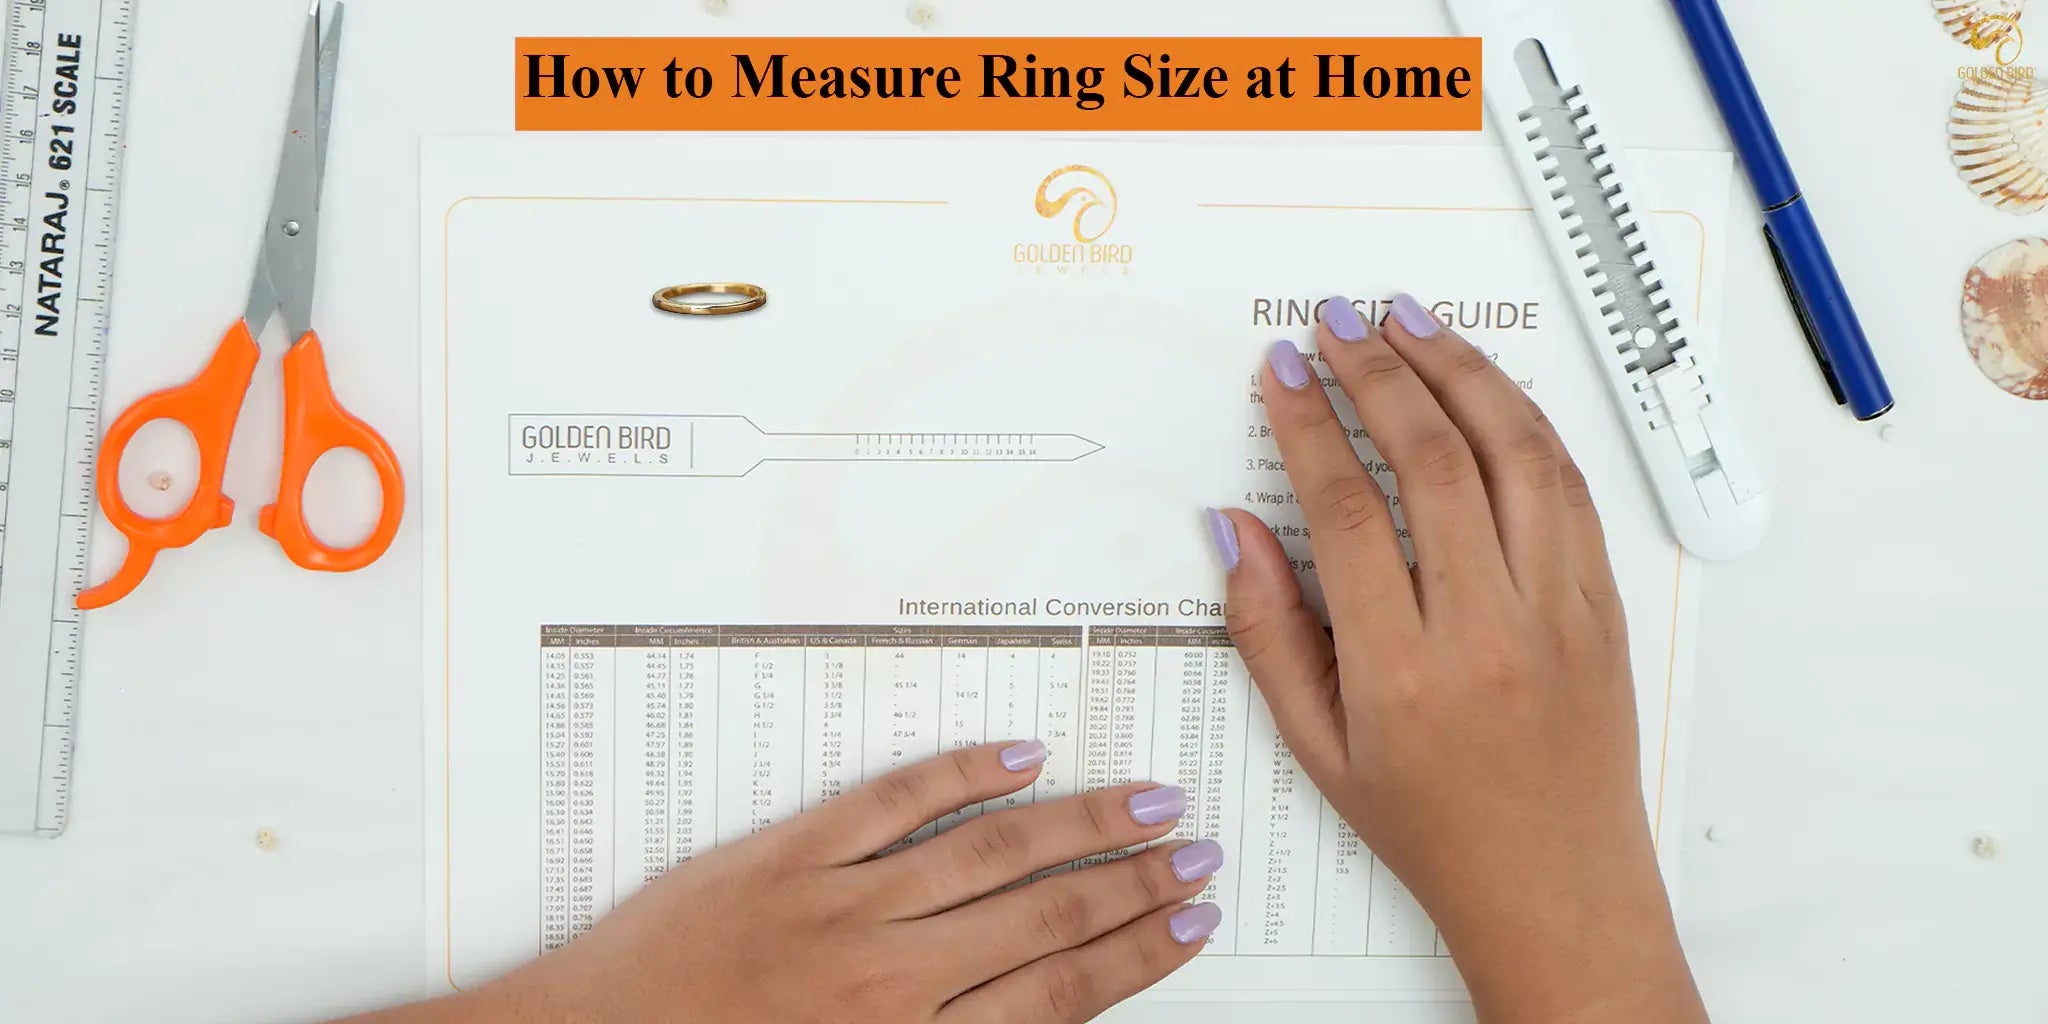 Ring size measurement chart to get a correct size at home with this sizer tool